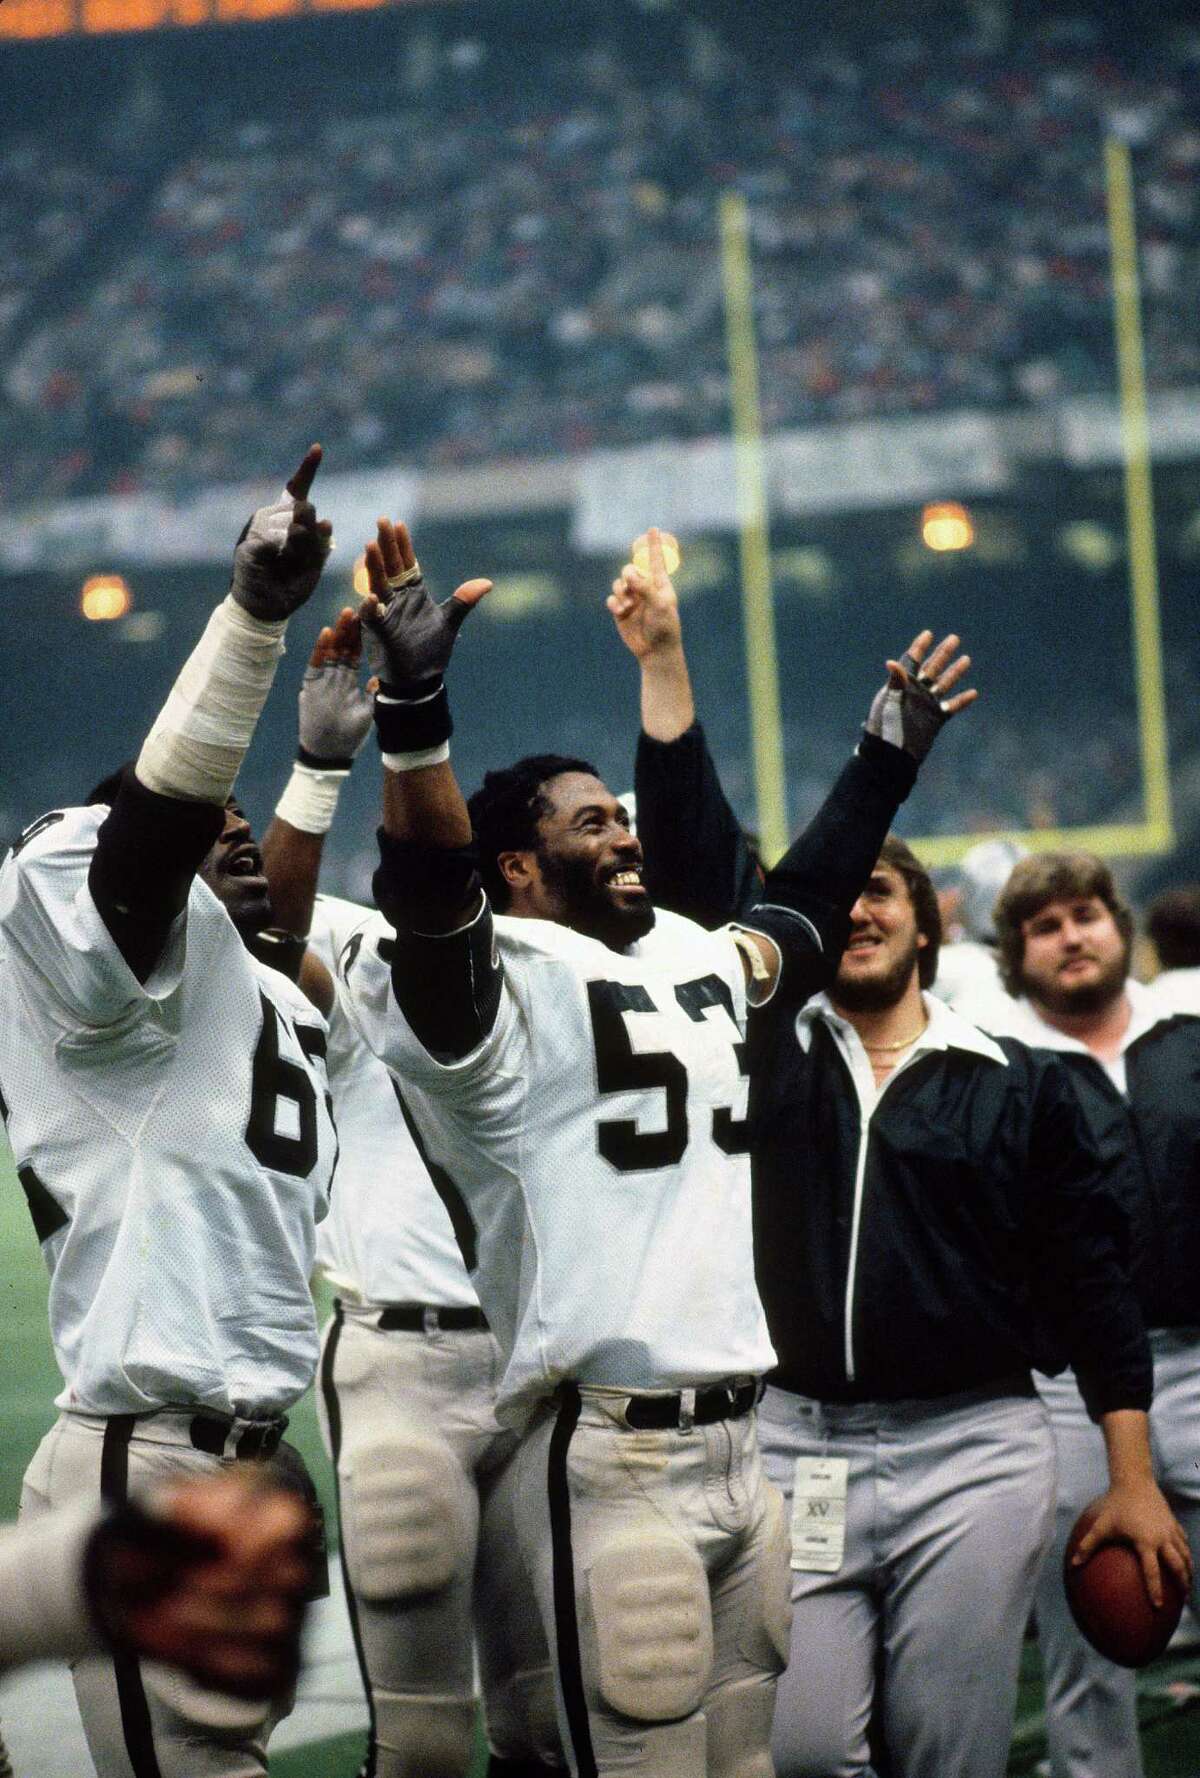 NEW ORLEANS, LA - JANUARY 25: Rod Martin #53 of the Oakland Raiders celebrates defeating the Philadelphia Eagles in Super Bowl XV at the Louisiana Superdome January 25, 1981 in New Orleans, Louisiana. The Raiders won the Super Bowl 27-10. (Photo by Focus on Sport/Getty Images)